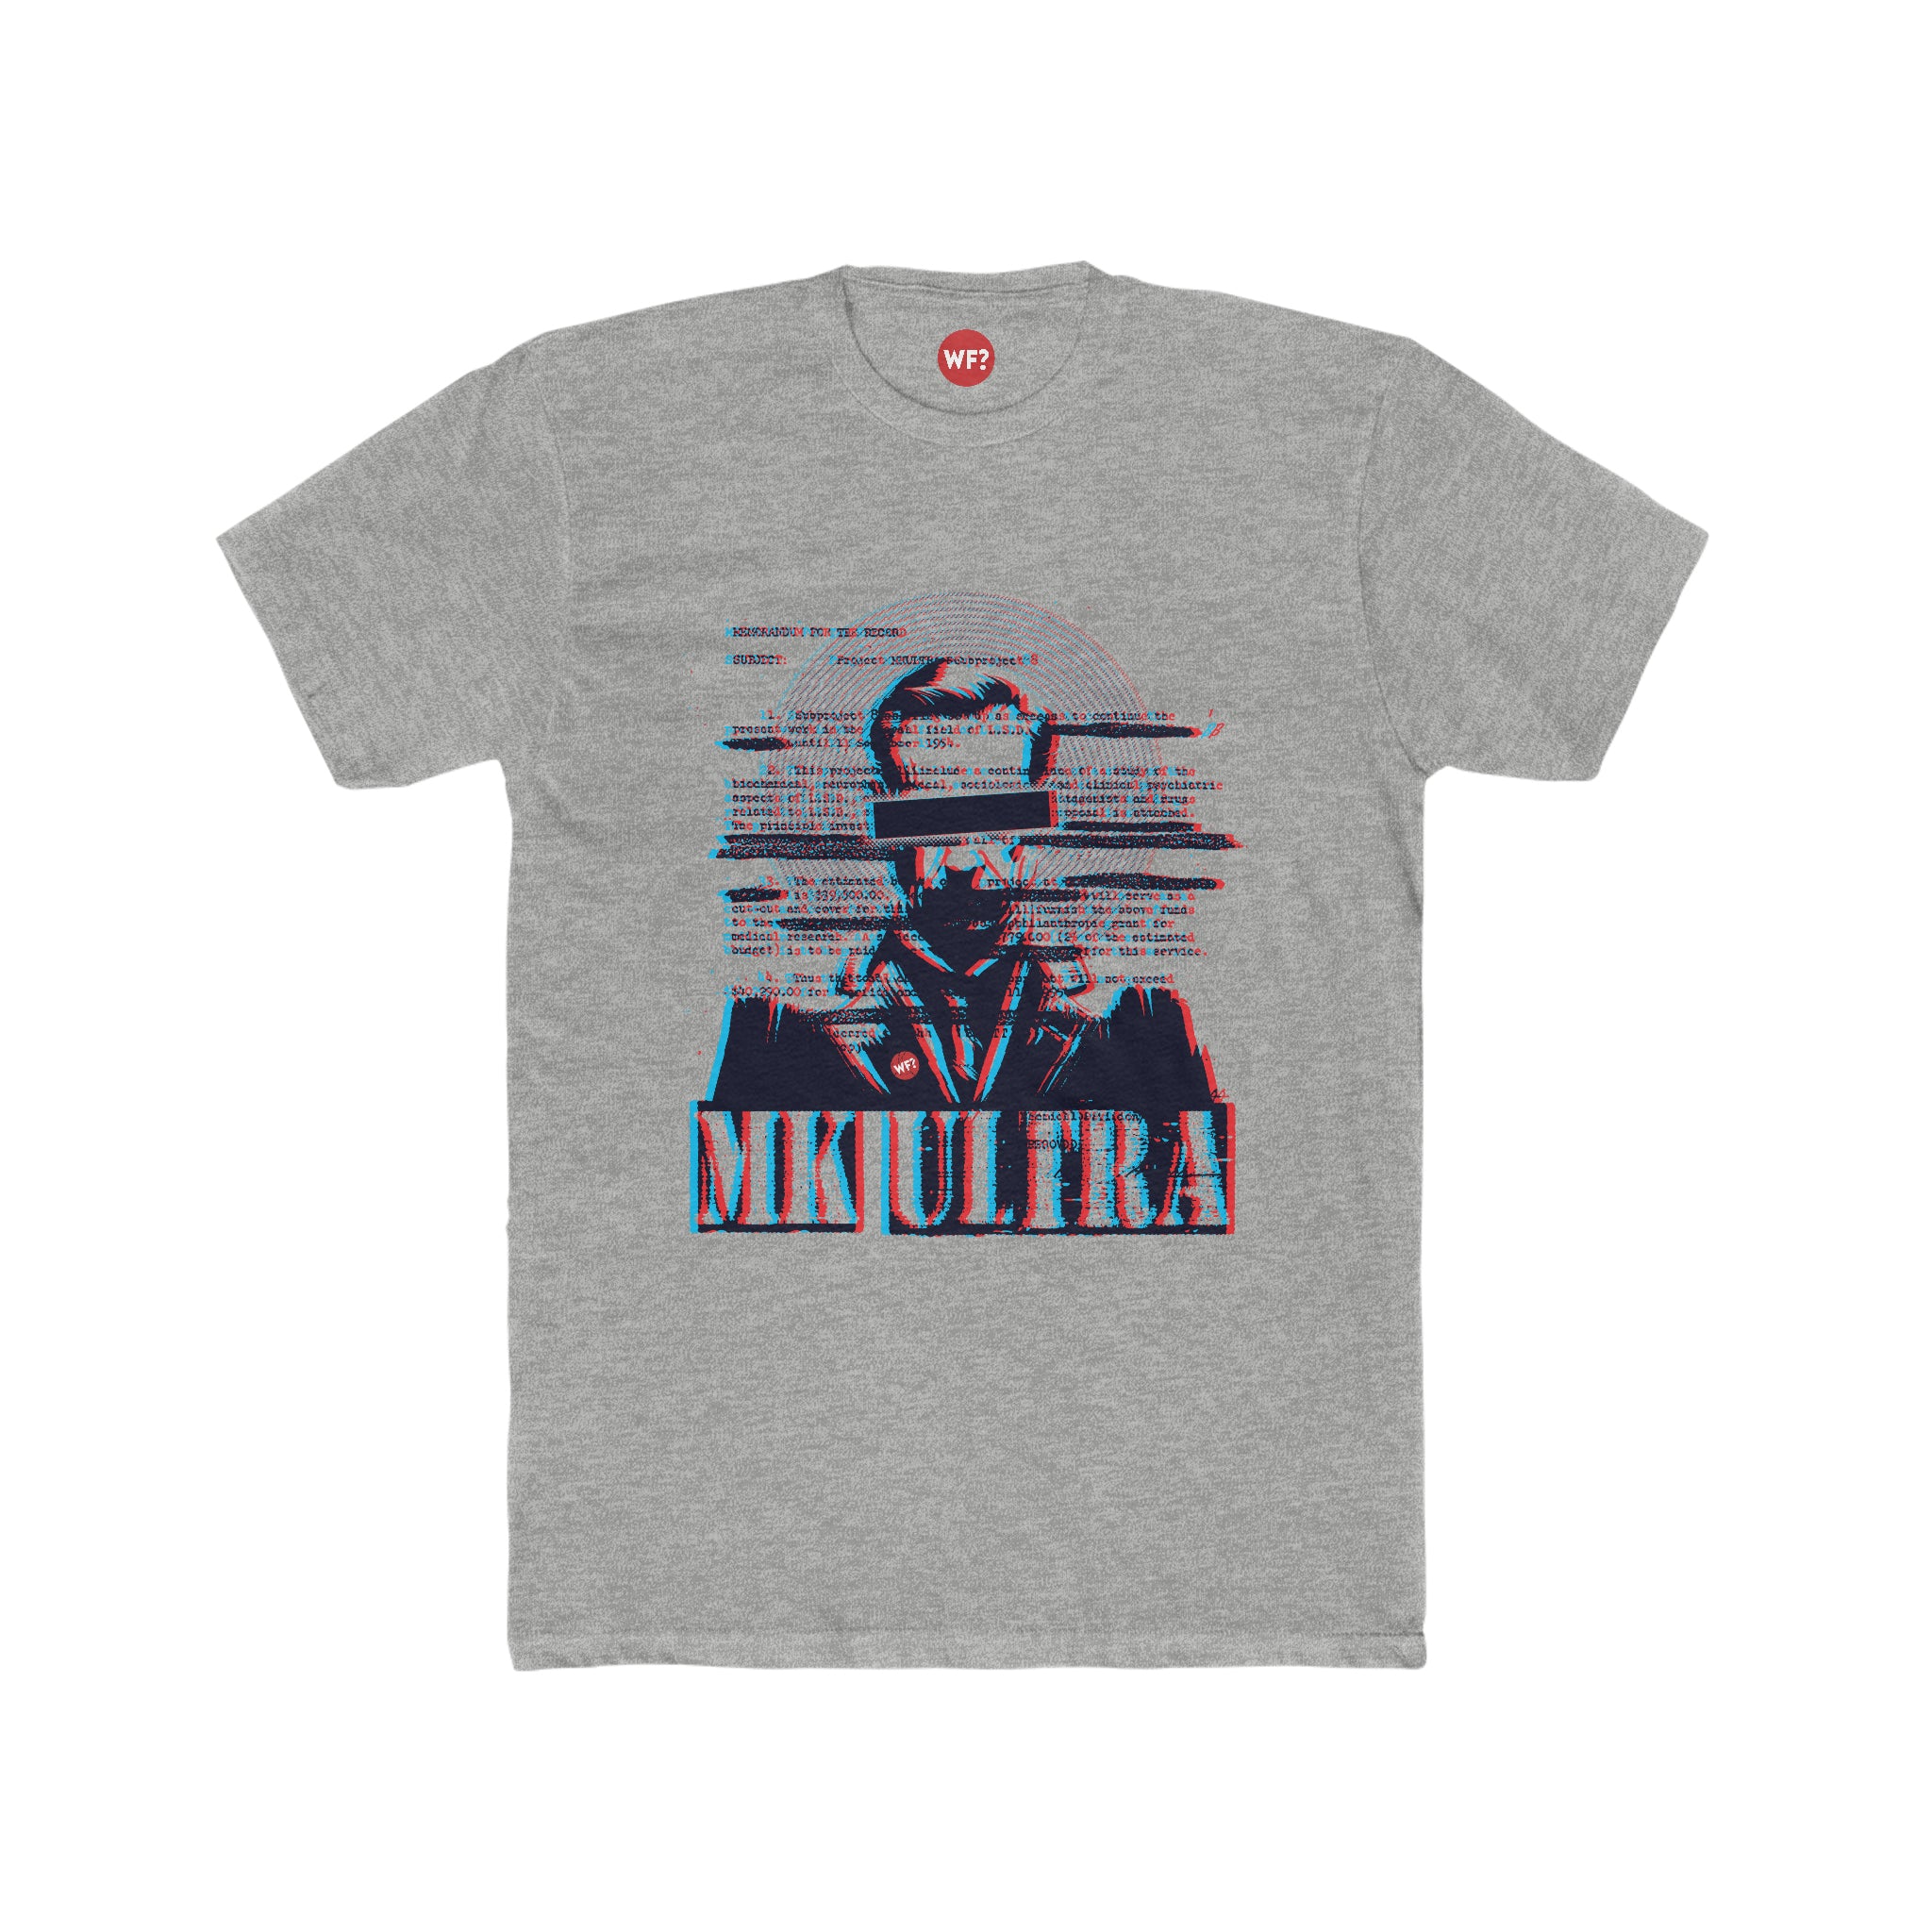 Buy heather-grey Project Podcast: MK Ultra Unisex Limited T-Shirt